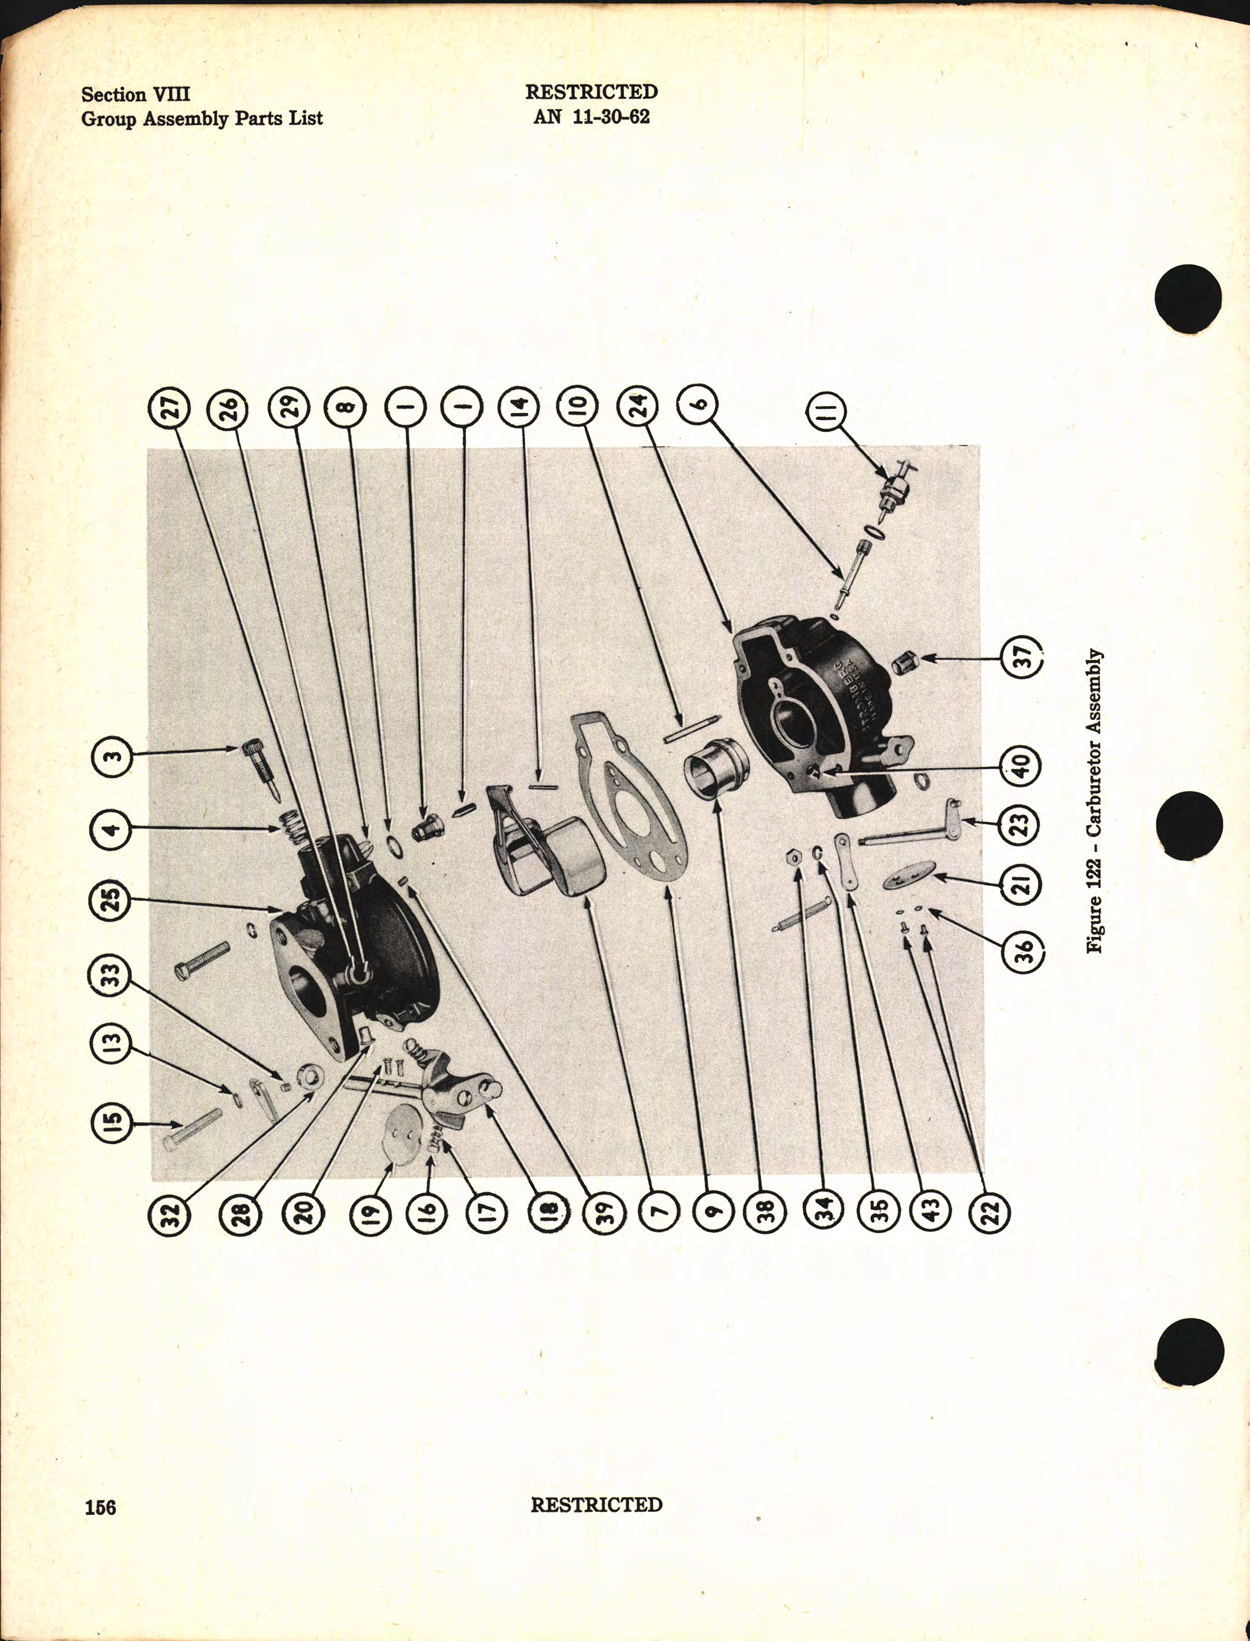 Sample page 8 from AirCorps Library document: Handbook of Instructions with Parts Catalog for Field Bombsight Repair Shop Box